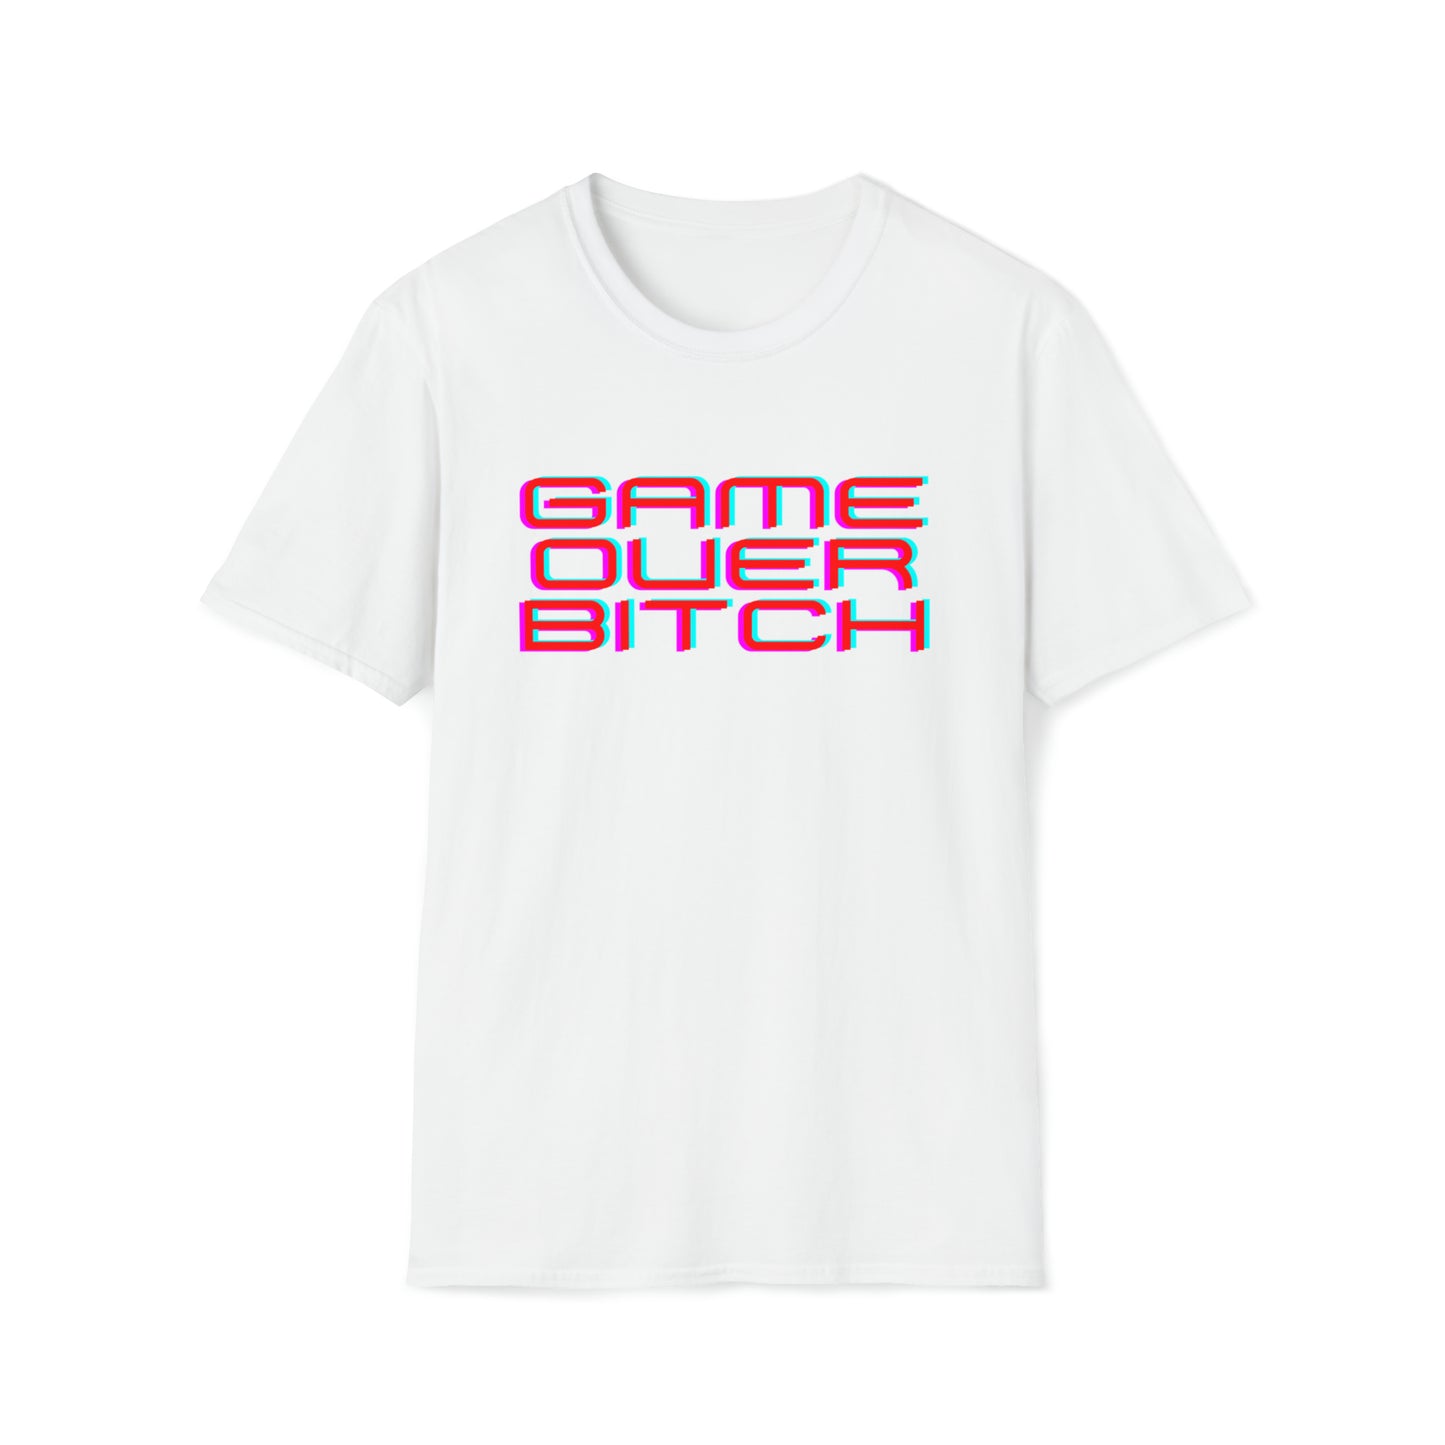 GAME OVER BITCH T-SHIRT